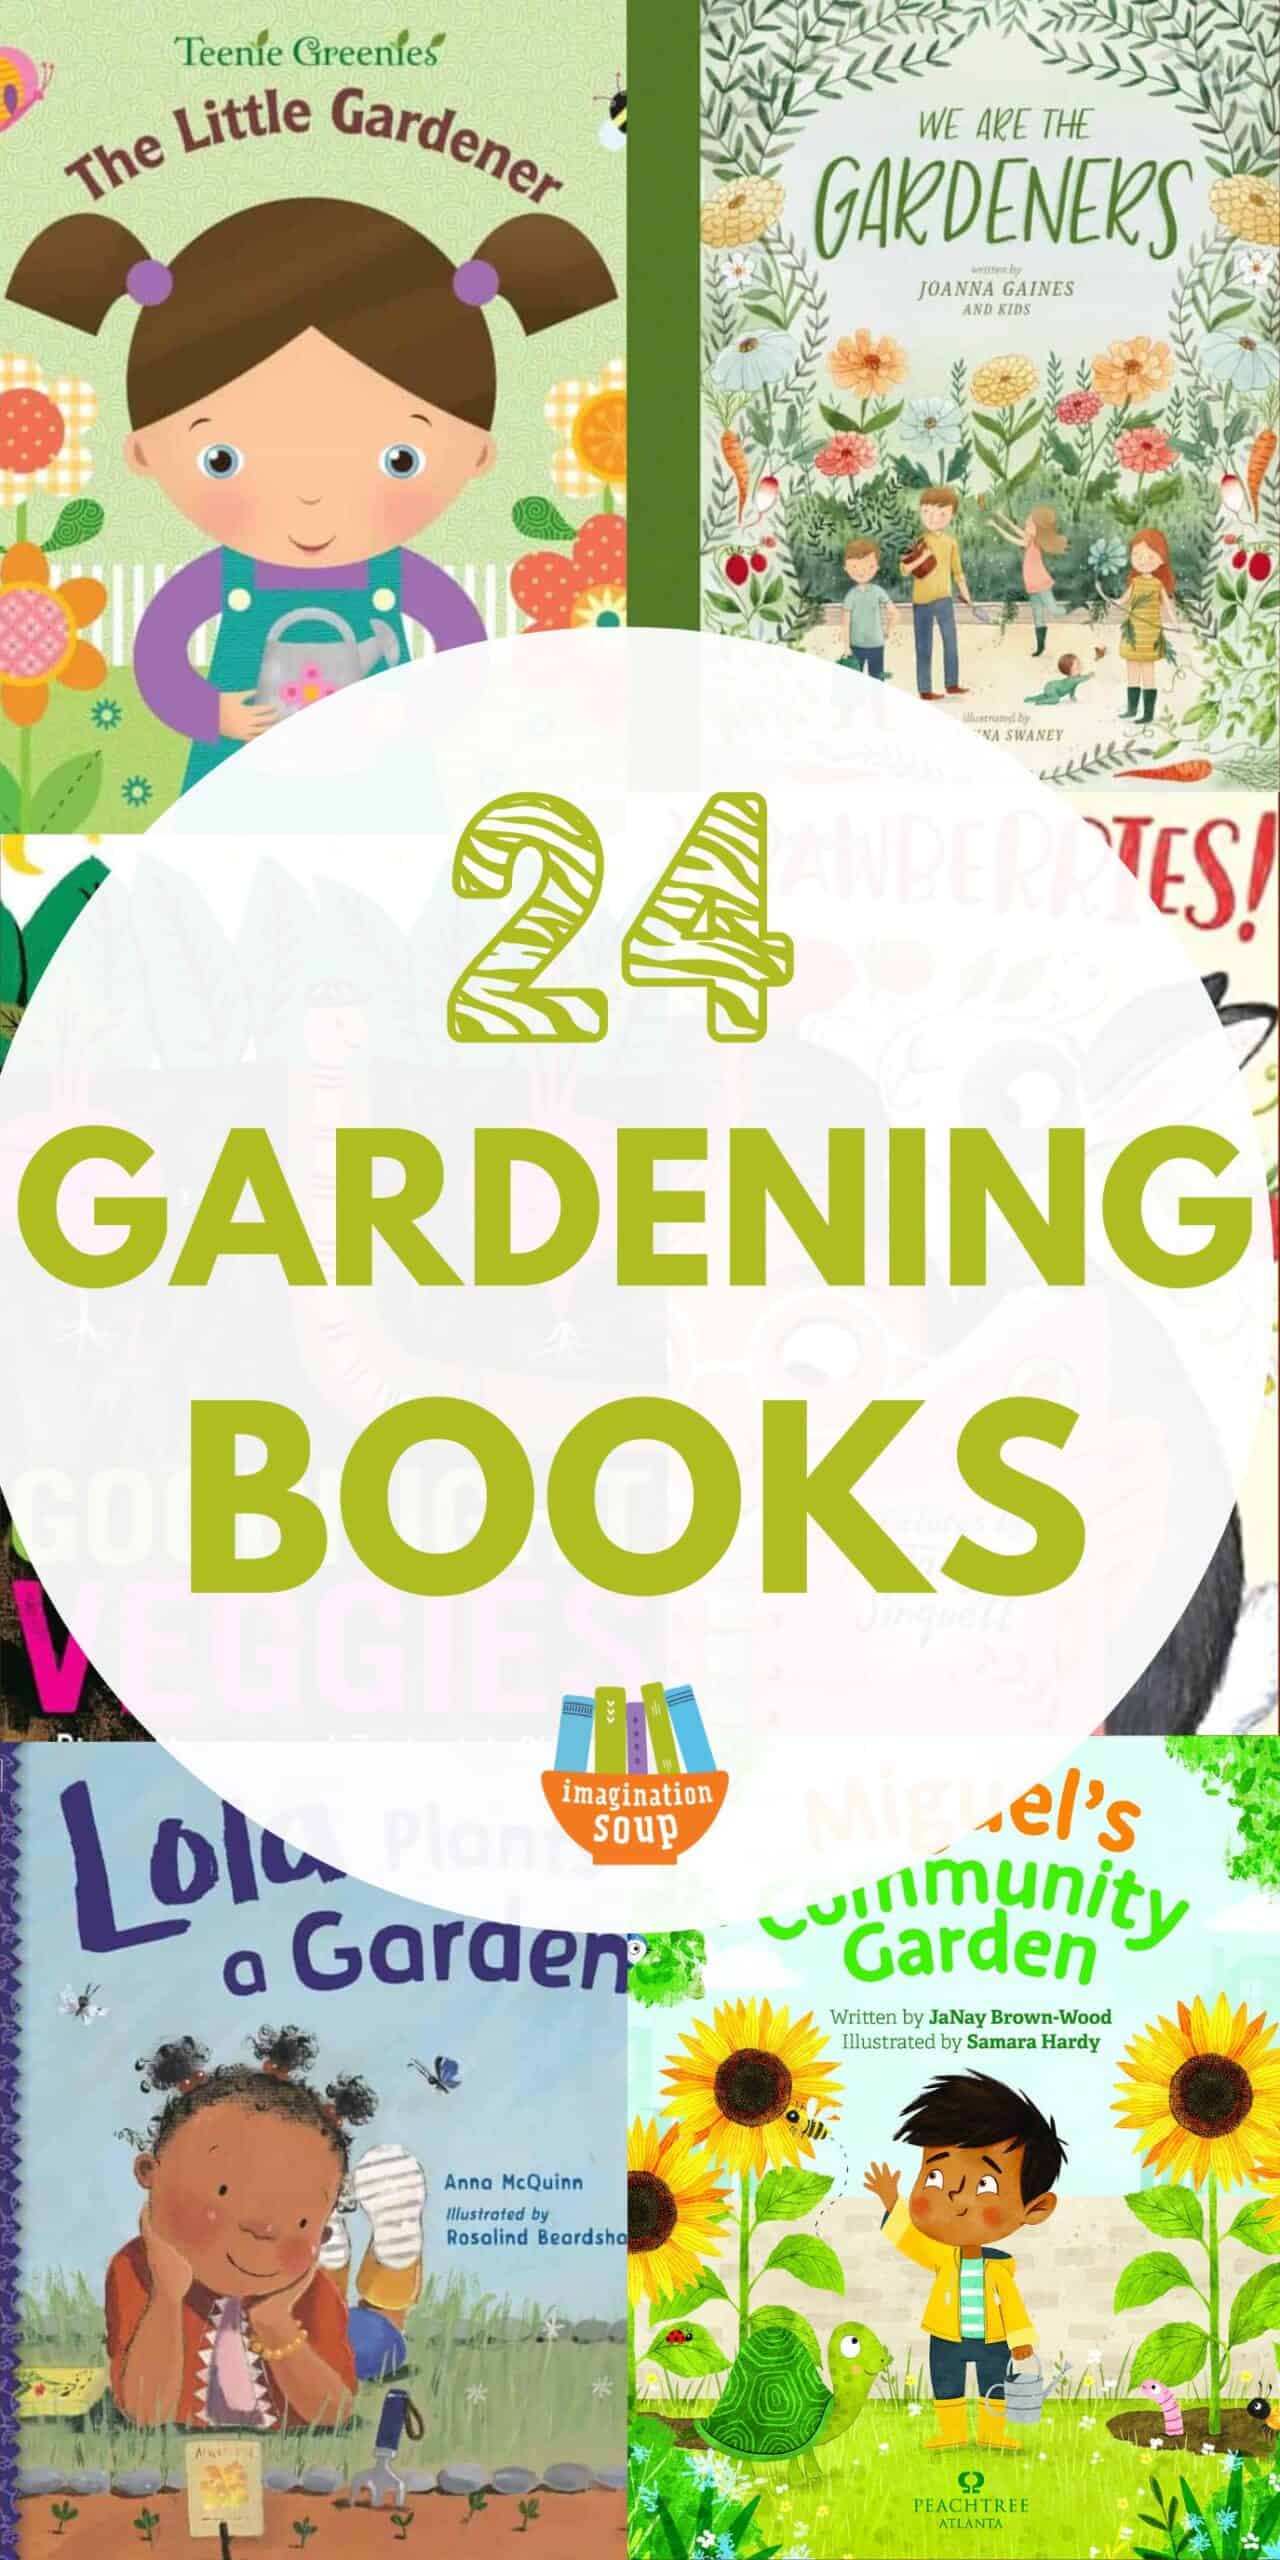 Are you excited to start a garden with your kids? Or at least teach your kids about gardening? Then, these gardening books for toddlers, preschoolers, and elementary age kids will be helpful tools as you share your love of nature with your children.